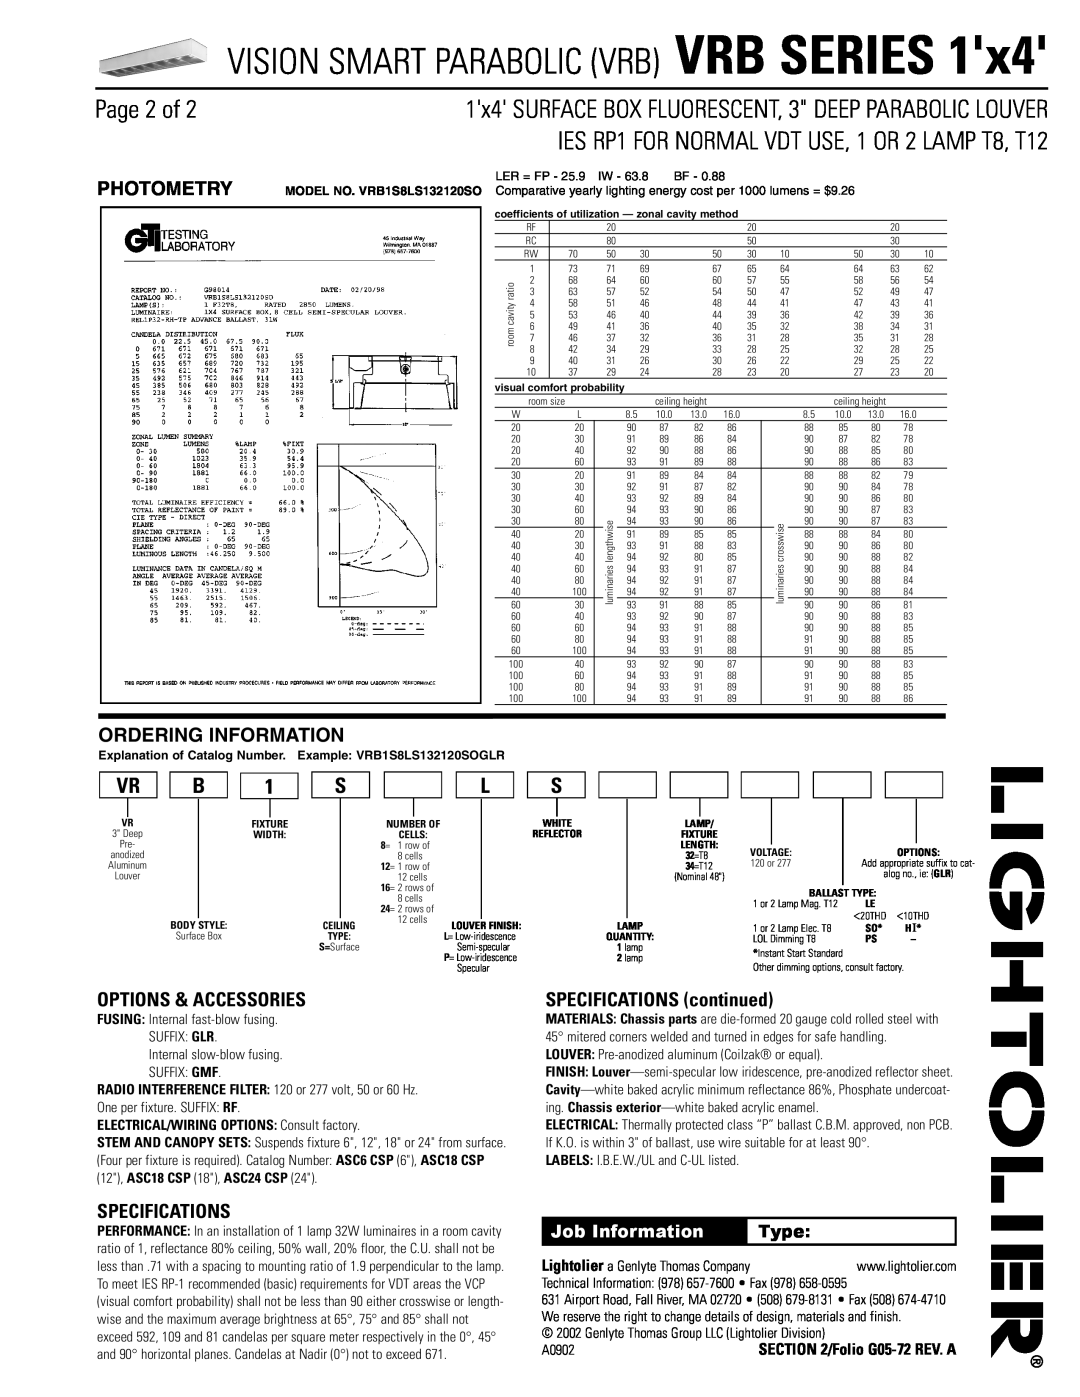 Lightolier VRB Series Page 2 of, Options & Accessories, Specifications, SPECIFICATIONS continued, Photometry, Type, Iw, Bf 